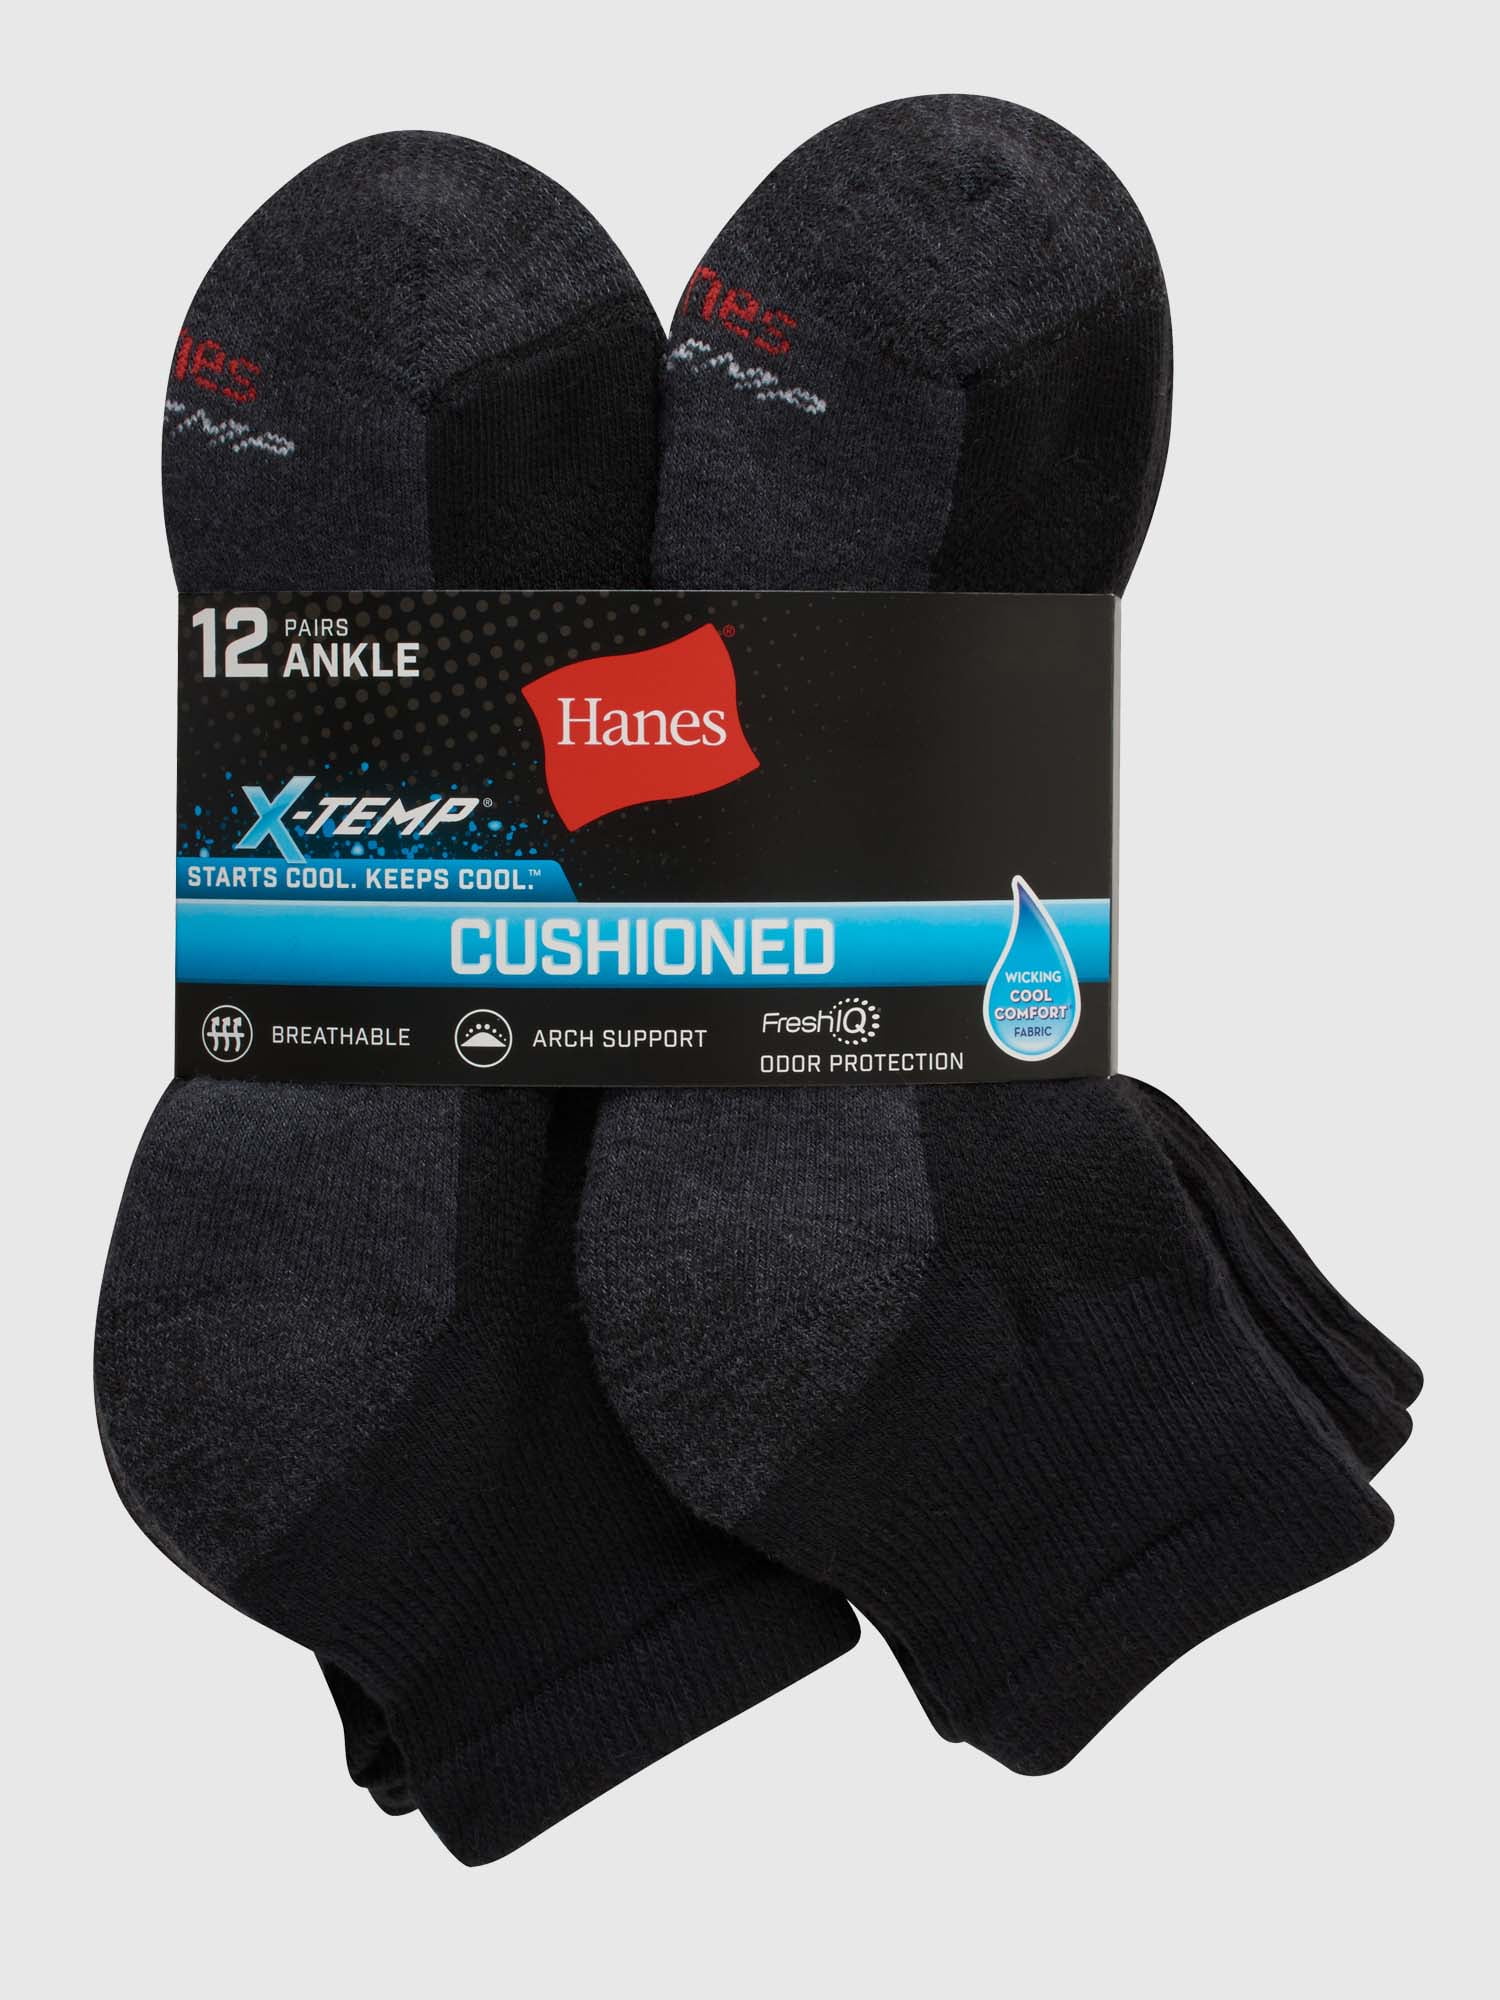 Hanes Men's X-Temp Cushioned + Arch & Vent Ankle Socks (Pack of 12 Pairs) - Black